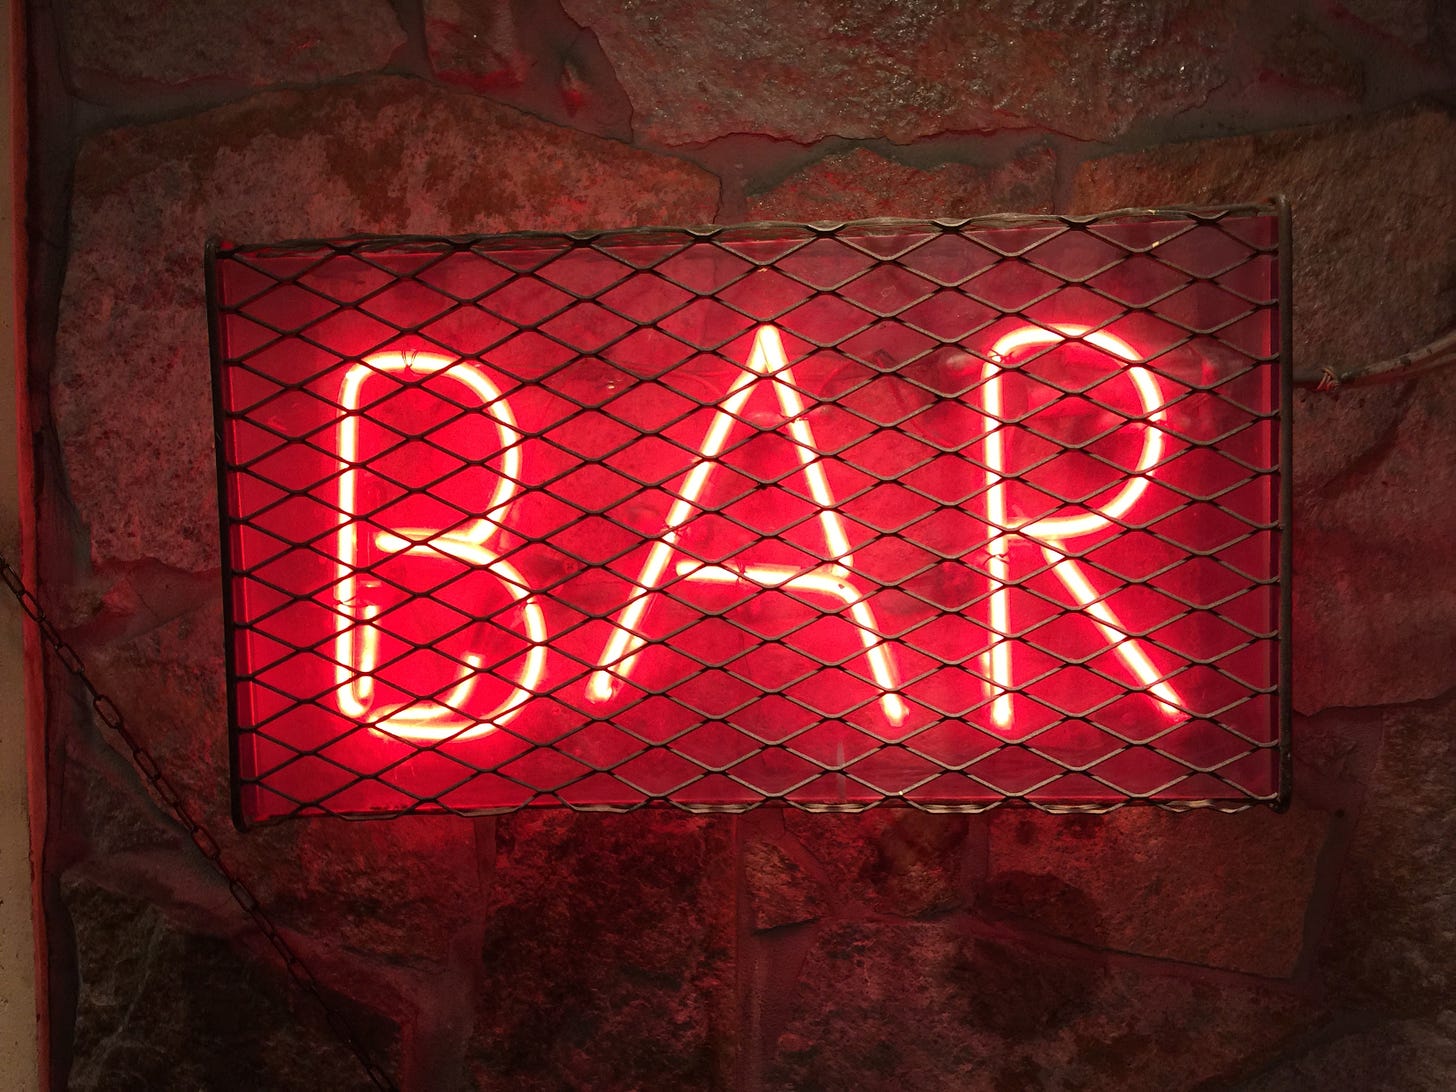 Red neon sign that says "bar" is on a wall behind a protective cage